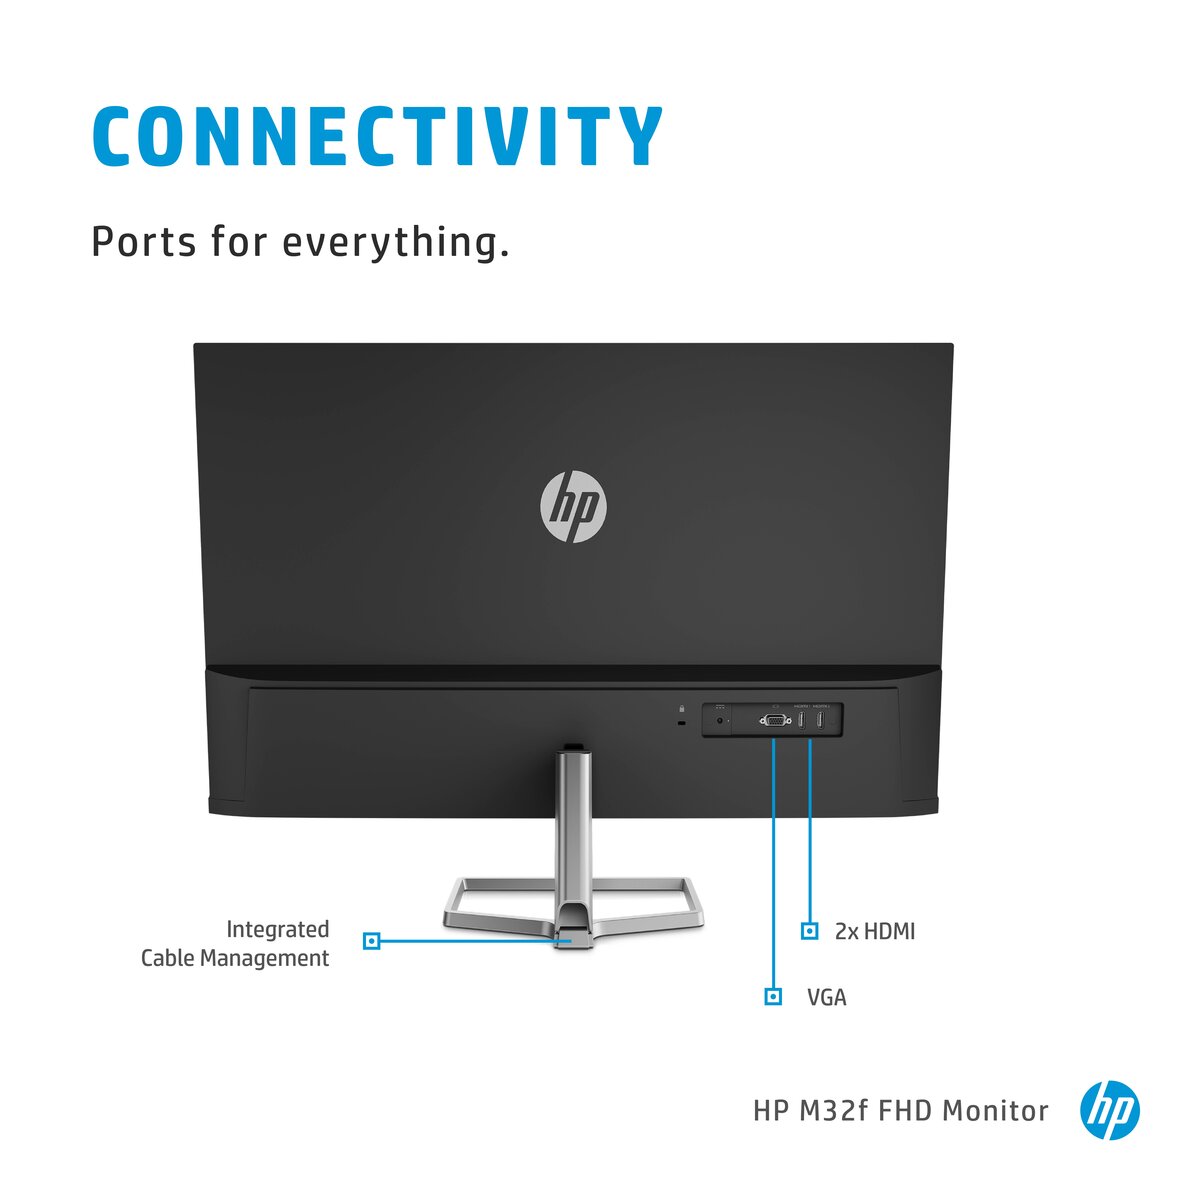 slide 4 of 11, zoom in, hp m32f fhd monitor